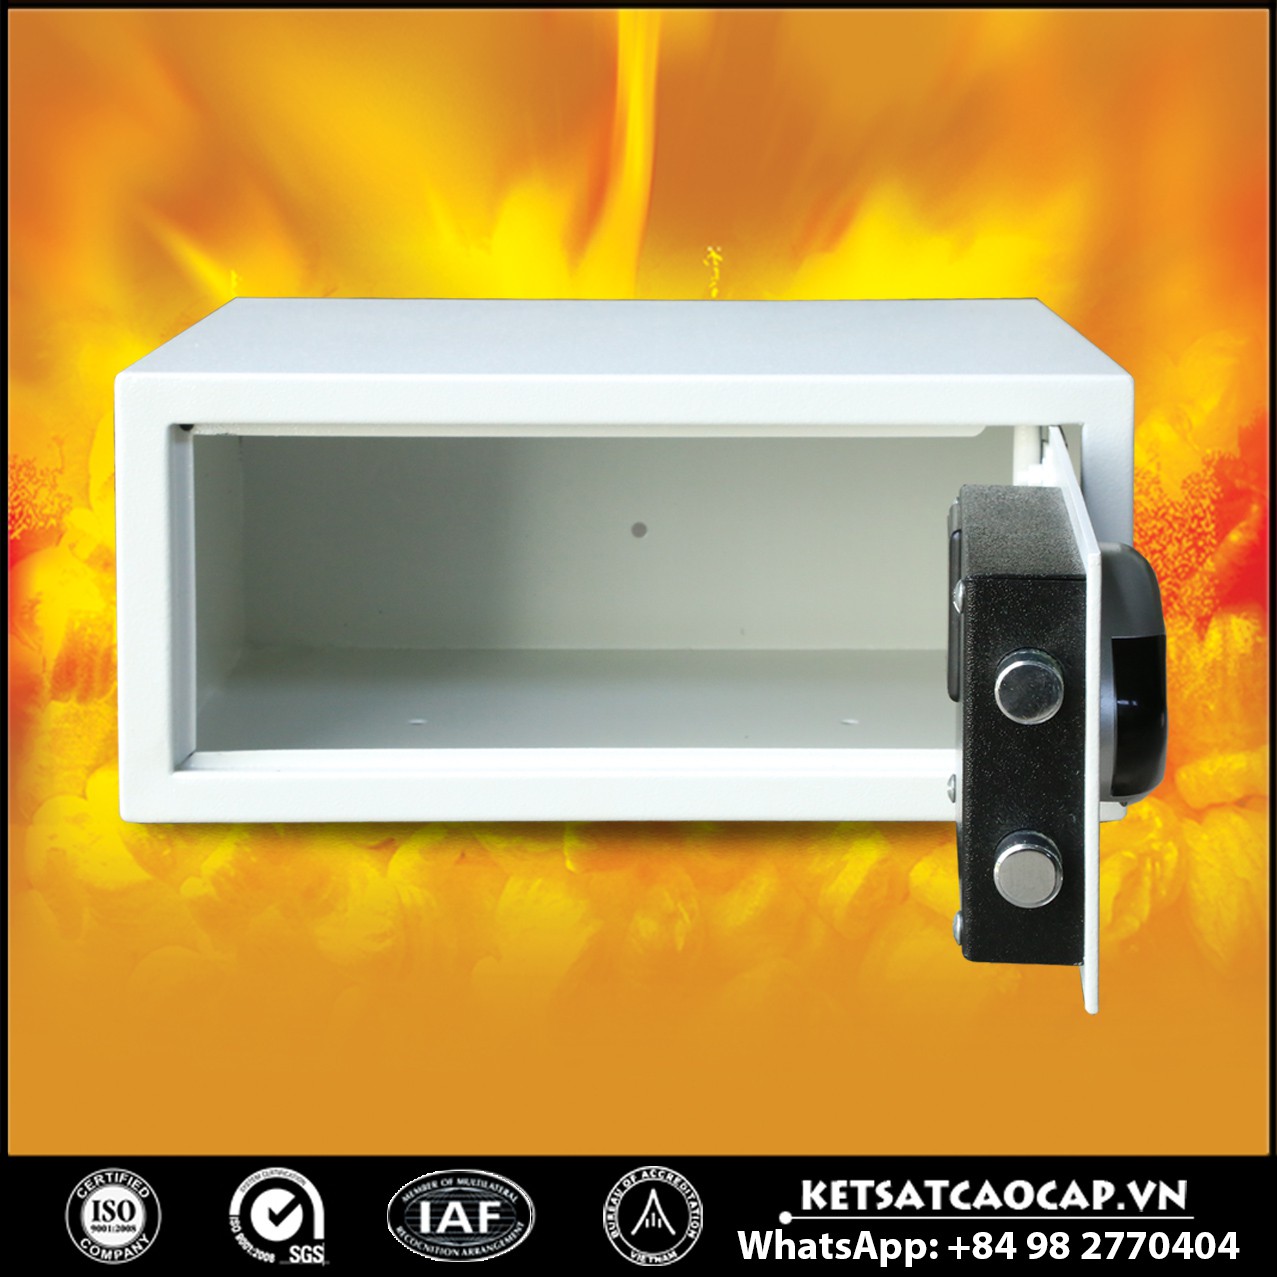 Hotel Safety Deposit Box Manufacturers & Suppliers‎ For Sale